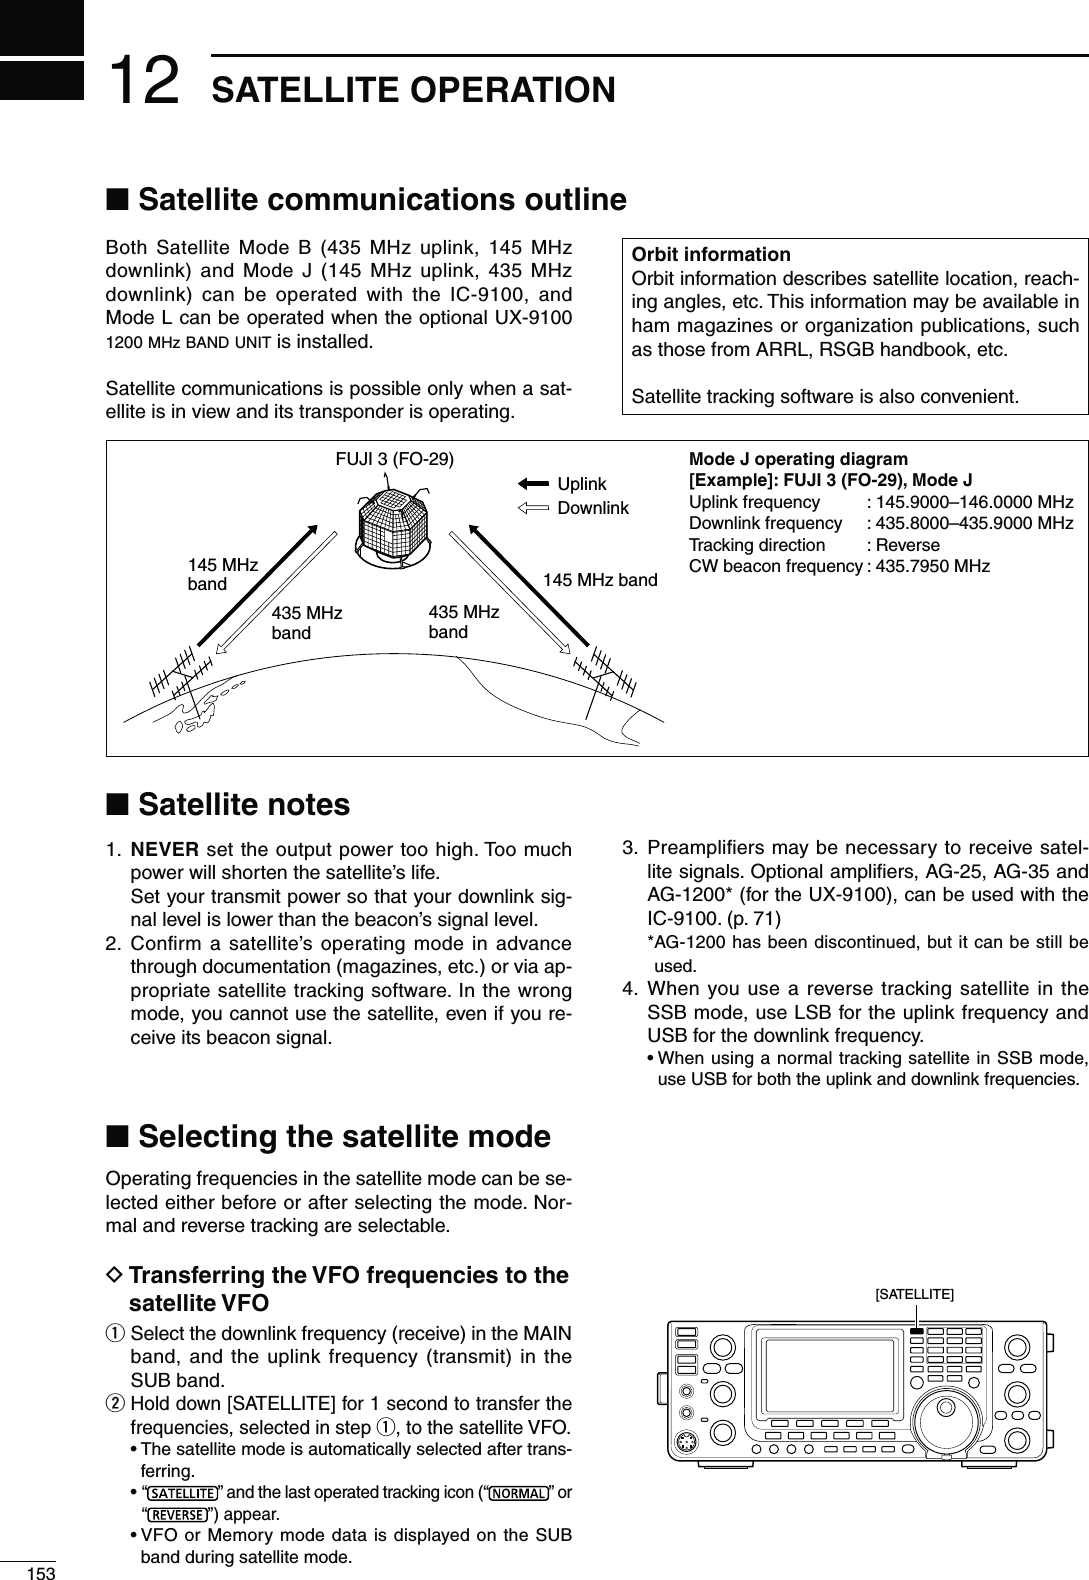 12153SATELLITE OPERATIONBoth Satellite Mode B (435 MHz uplink, 145 MHz downlink) and Mode J (145 MHz uplink, 435 MHz downlink) can be operated with the IC-9100, and Mode L can be operated when the optional UX-9100 1200 MHz BAND UNIT is installed.Satellite communications is possible only when a sat-ellite is in view and its transponder is operating.N3ATELLITENOTES1.  NEVER set the output power too high. Too much power will shorten the satellite’s life.  Set your transmit power so that your downlink sig-nal level is lower than the beacon’s signal level.2.  Conﬁrm a satellite’s operating mode in advance through documentation (magazines, etc.) or via ap-propriate satellite tracking software. In the wrong mode, you cannot use the satellite, even if you re-ceive its beacon signal.3.  Preampliﬁers may be necessary to receive satel-lite signals. Optional ampliﬁers, AG-25, AG-35 and AG-1200* (for the UX-9100), can be used with the IC-9100. (p. 71) * AG-1200 has been discontinued, but it can be still be used.4.  When you use a reverse tracking satellite in the SSB mode, use LSB for the uplink frequency and USB for the downlink frequency.s7HENUSINGANORMALTRACKINGSATELLITEIN33&quot;MODEuse USB for both the uplink and downlink frequencies.Operating frequencies in the satellite mode can be se-lected either before or after selecting the mode. Nor-mal and reverse tracking are selectable.D4RANSFERRINGTHE6&amp;/FREQUENCIESTOTHESATELLITE6&amp;/q  Select the downlink frequency (receive) in the MAIN band, and the uplink frequency (transmit) in the SUB band.w  Hold down [SATELLITE] for 1 second to transfer the frequencies, selected in step q, to the satellite VFO.s4HESATELLITEMODEISAUTOMATICALLYSELECTEDAFTERTRANS-ferring. s“” and the last operated tracking icon (“ ” or “”) appear.s6&amp;/OR-EMORYMODEDATAISDISPLAYEDONTHE35&quot;band during satellite mode.435 MHz band435 MHz band145 MHz band145 MHz bandFUJI 3 (FO-29)UplinkDownlink-ODE*OPERATINGDIAGRAM ;%XAMPLE=&amp;5*)&amp;/-ODE*Uplink frequency  : 145.9000–146.0000 MHzDownlink frequency  : 435.8000–435.9000 MHzTracking direction  : ReverseCW beacon frequency : 435.7950 MHz/RBITINFORMATIONOrbit information describes satellite location, reach-ing angles, etc. This information may be available in ham magazines or organization publications, such as those from ARRL, RSGB handbook, etc.Satellite tracking software is also convenient.N3ATELLITECOMMUNICATIONSOUTLINEN3ELECTINGTHESATELLITEMODE[SATELLITE] 